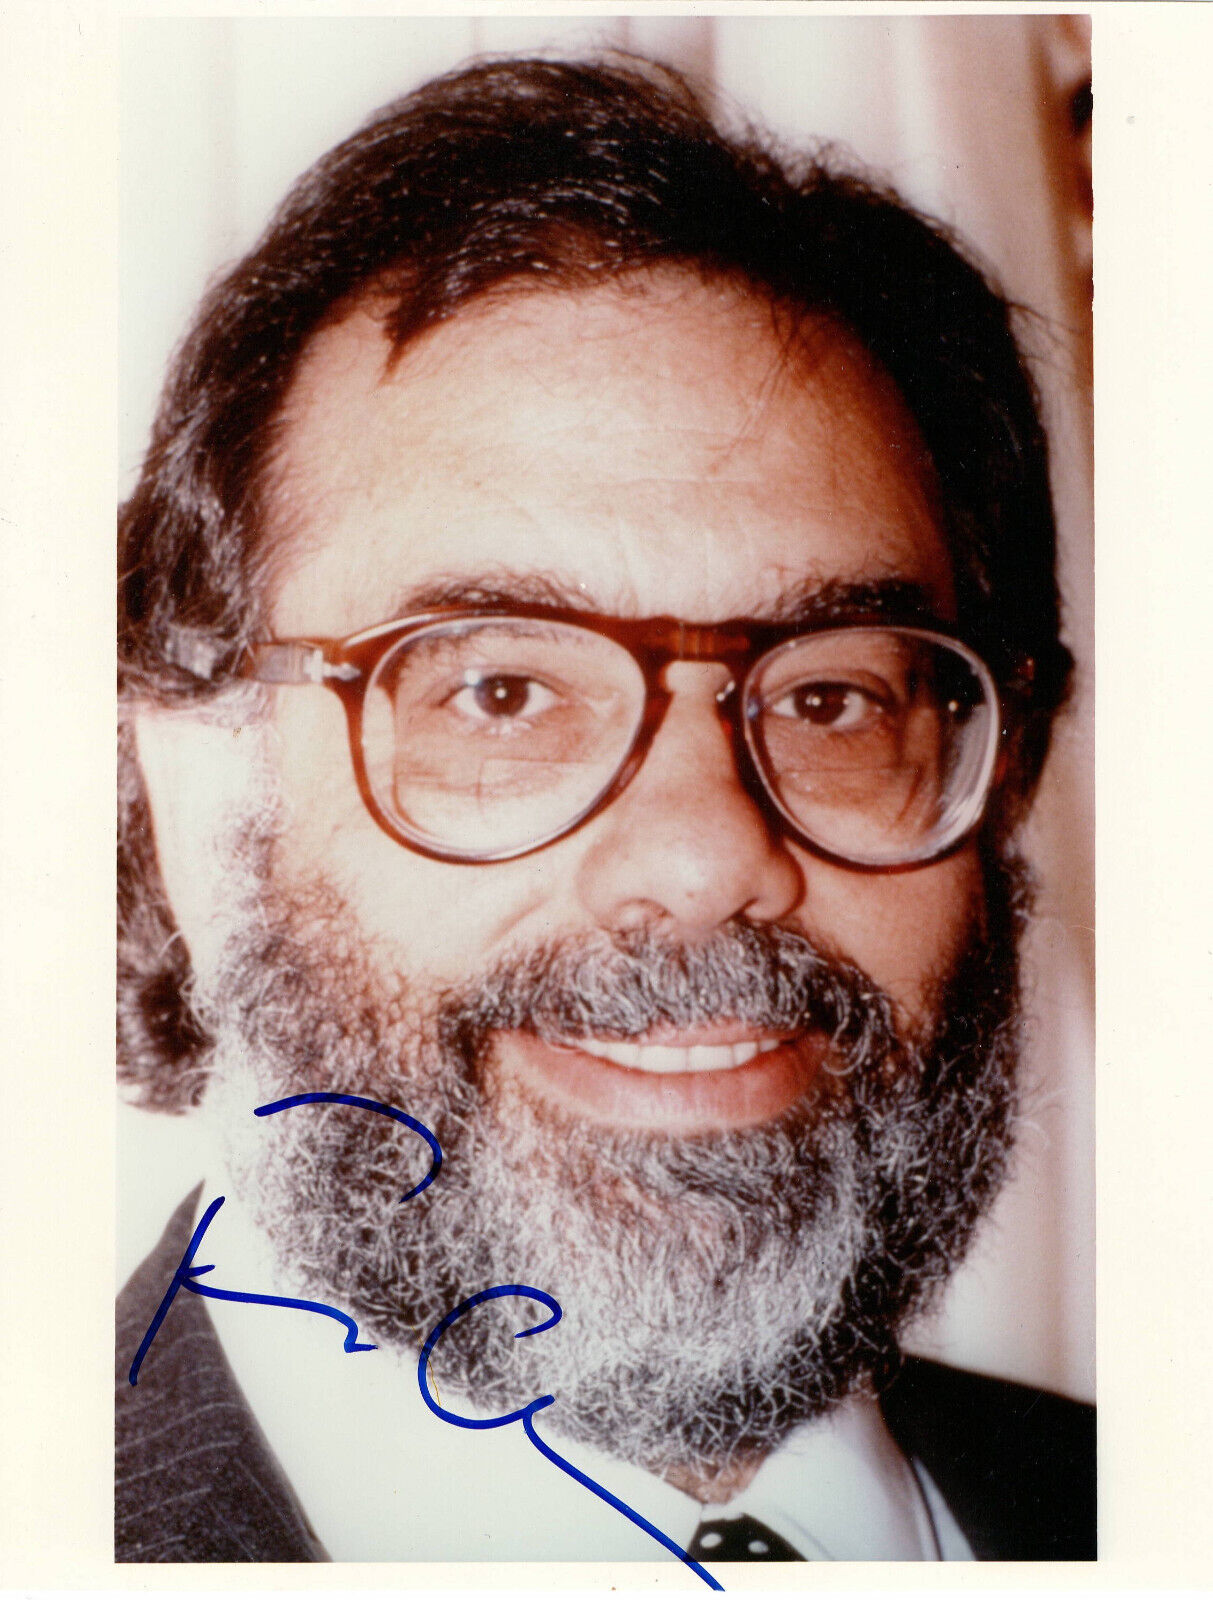 FRANCIS FORD COPPOLA SIGNED AUTO THE GODFATHER 8X10 PHOTO BECKETT BAS